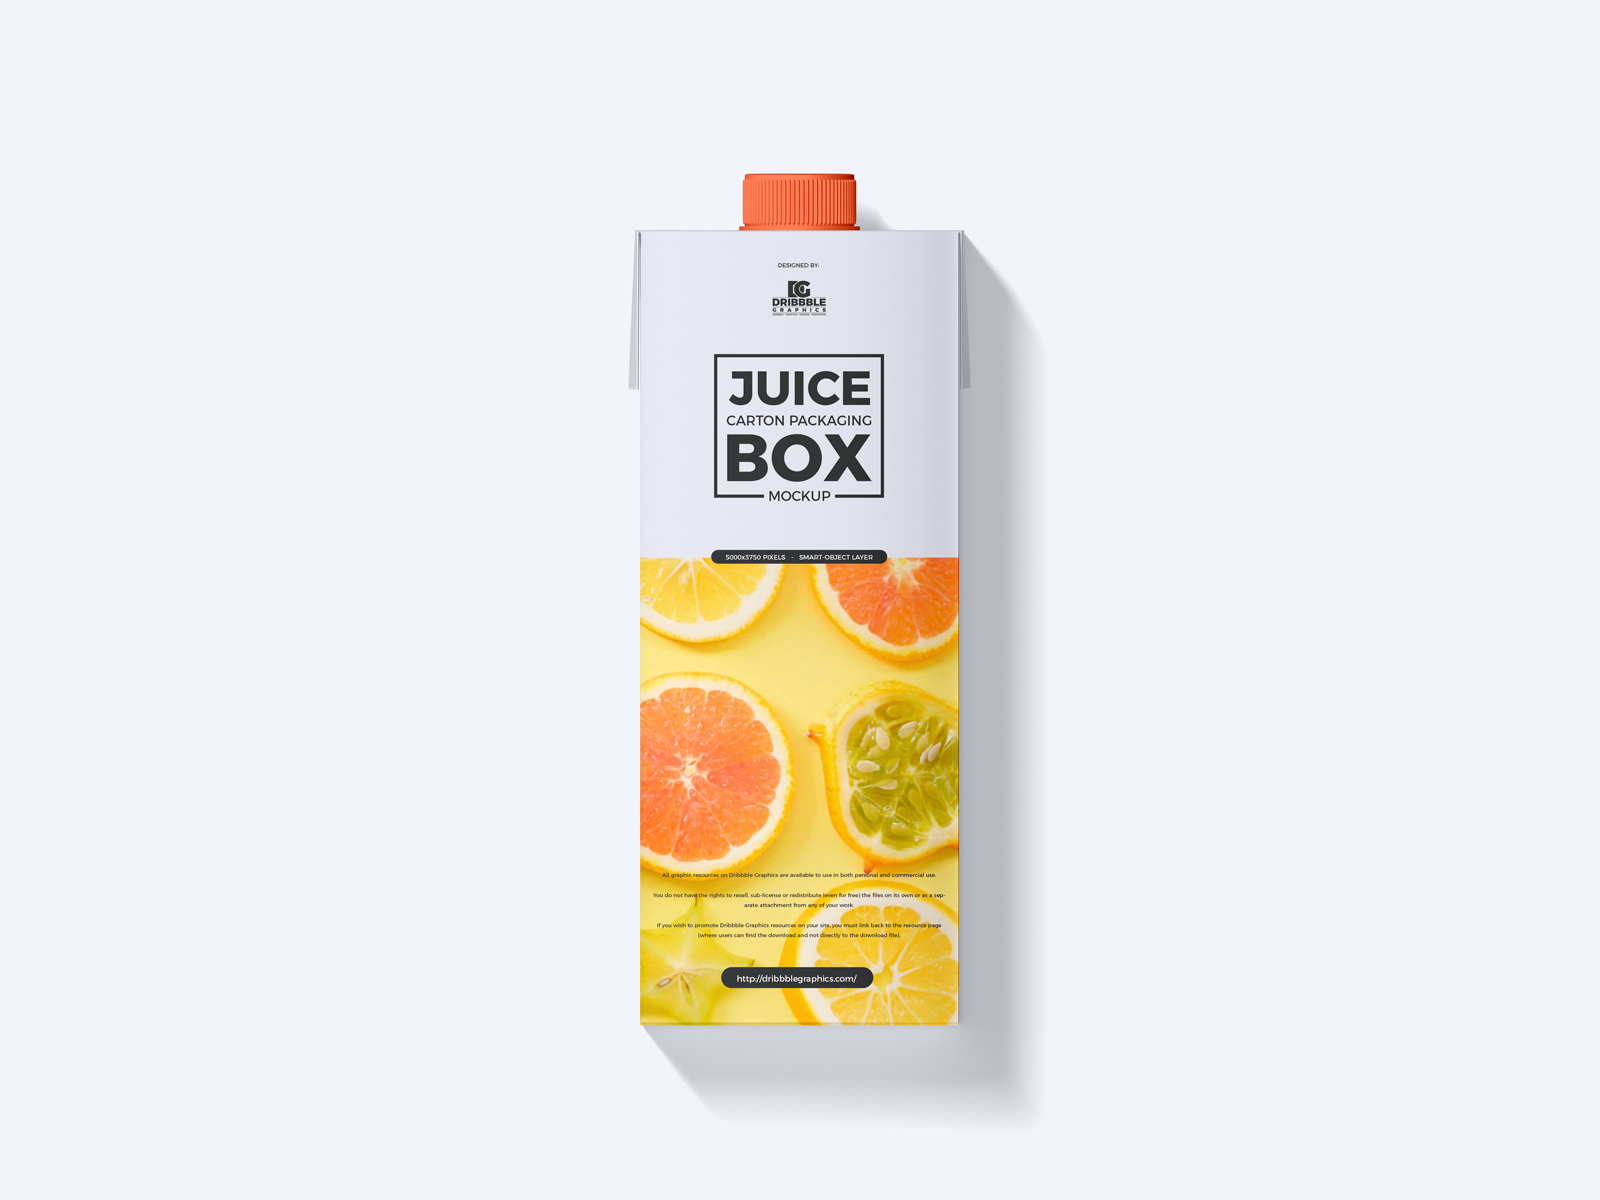 Download Free Juice Carton Box Mockup By Jessica Elle On Dribbble